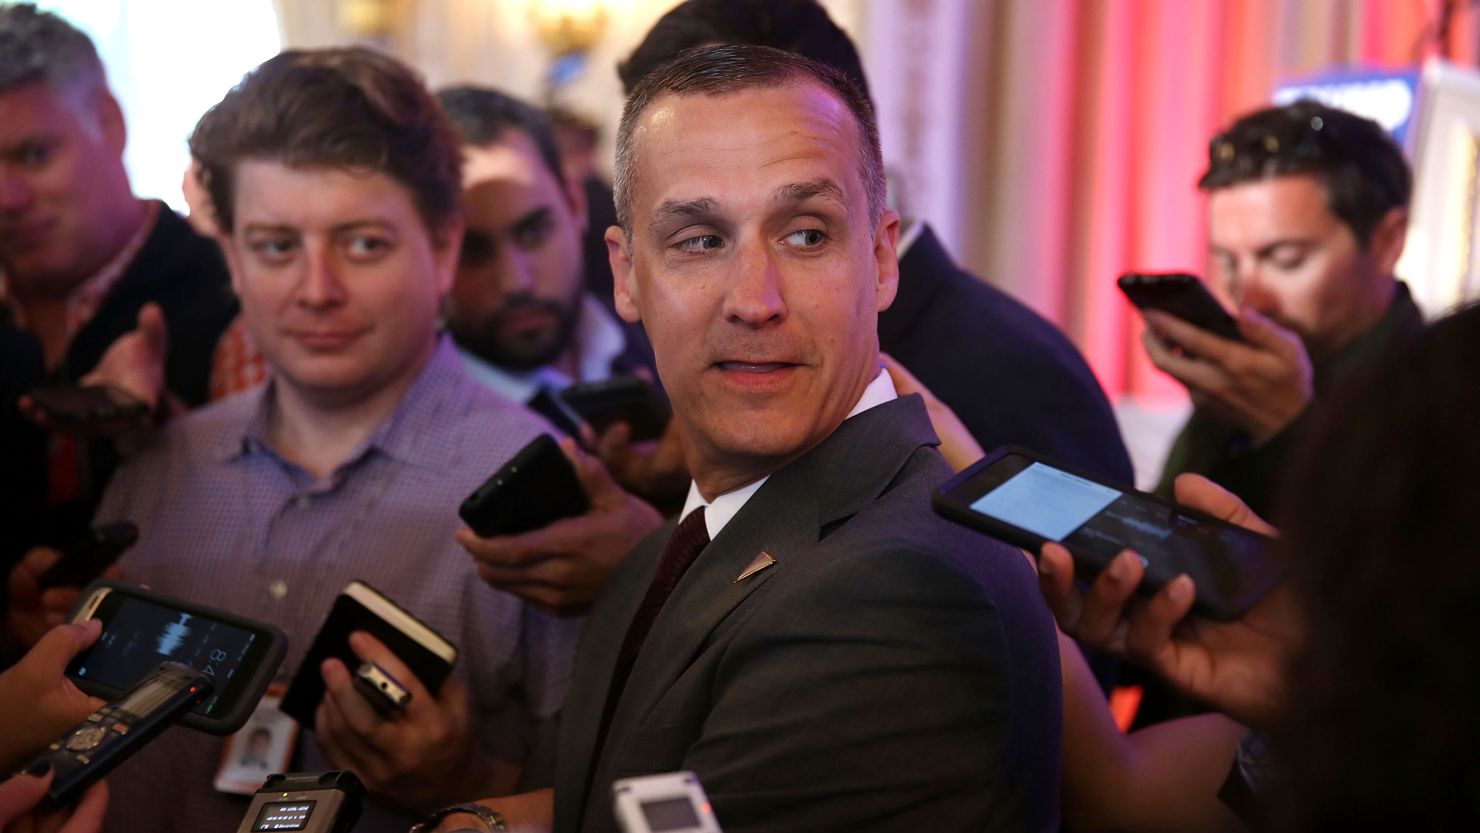 Corey Lewandowski campaign manager for Republican presidential candidate Donald Trump speaks with the media before former presidential candidate Ben Carson gives his endorsement to Trump at the Mar-A-Lago Club on March 11, 2016 in Palm Beach, Florida. (Photo by Joe Raedle/Getty Images)